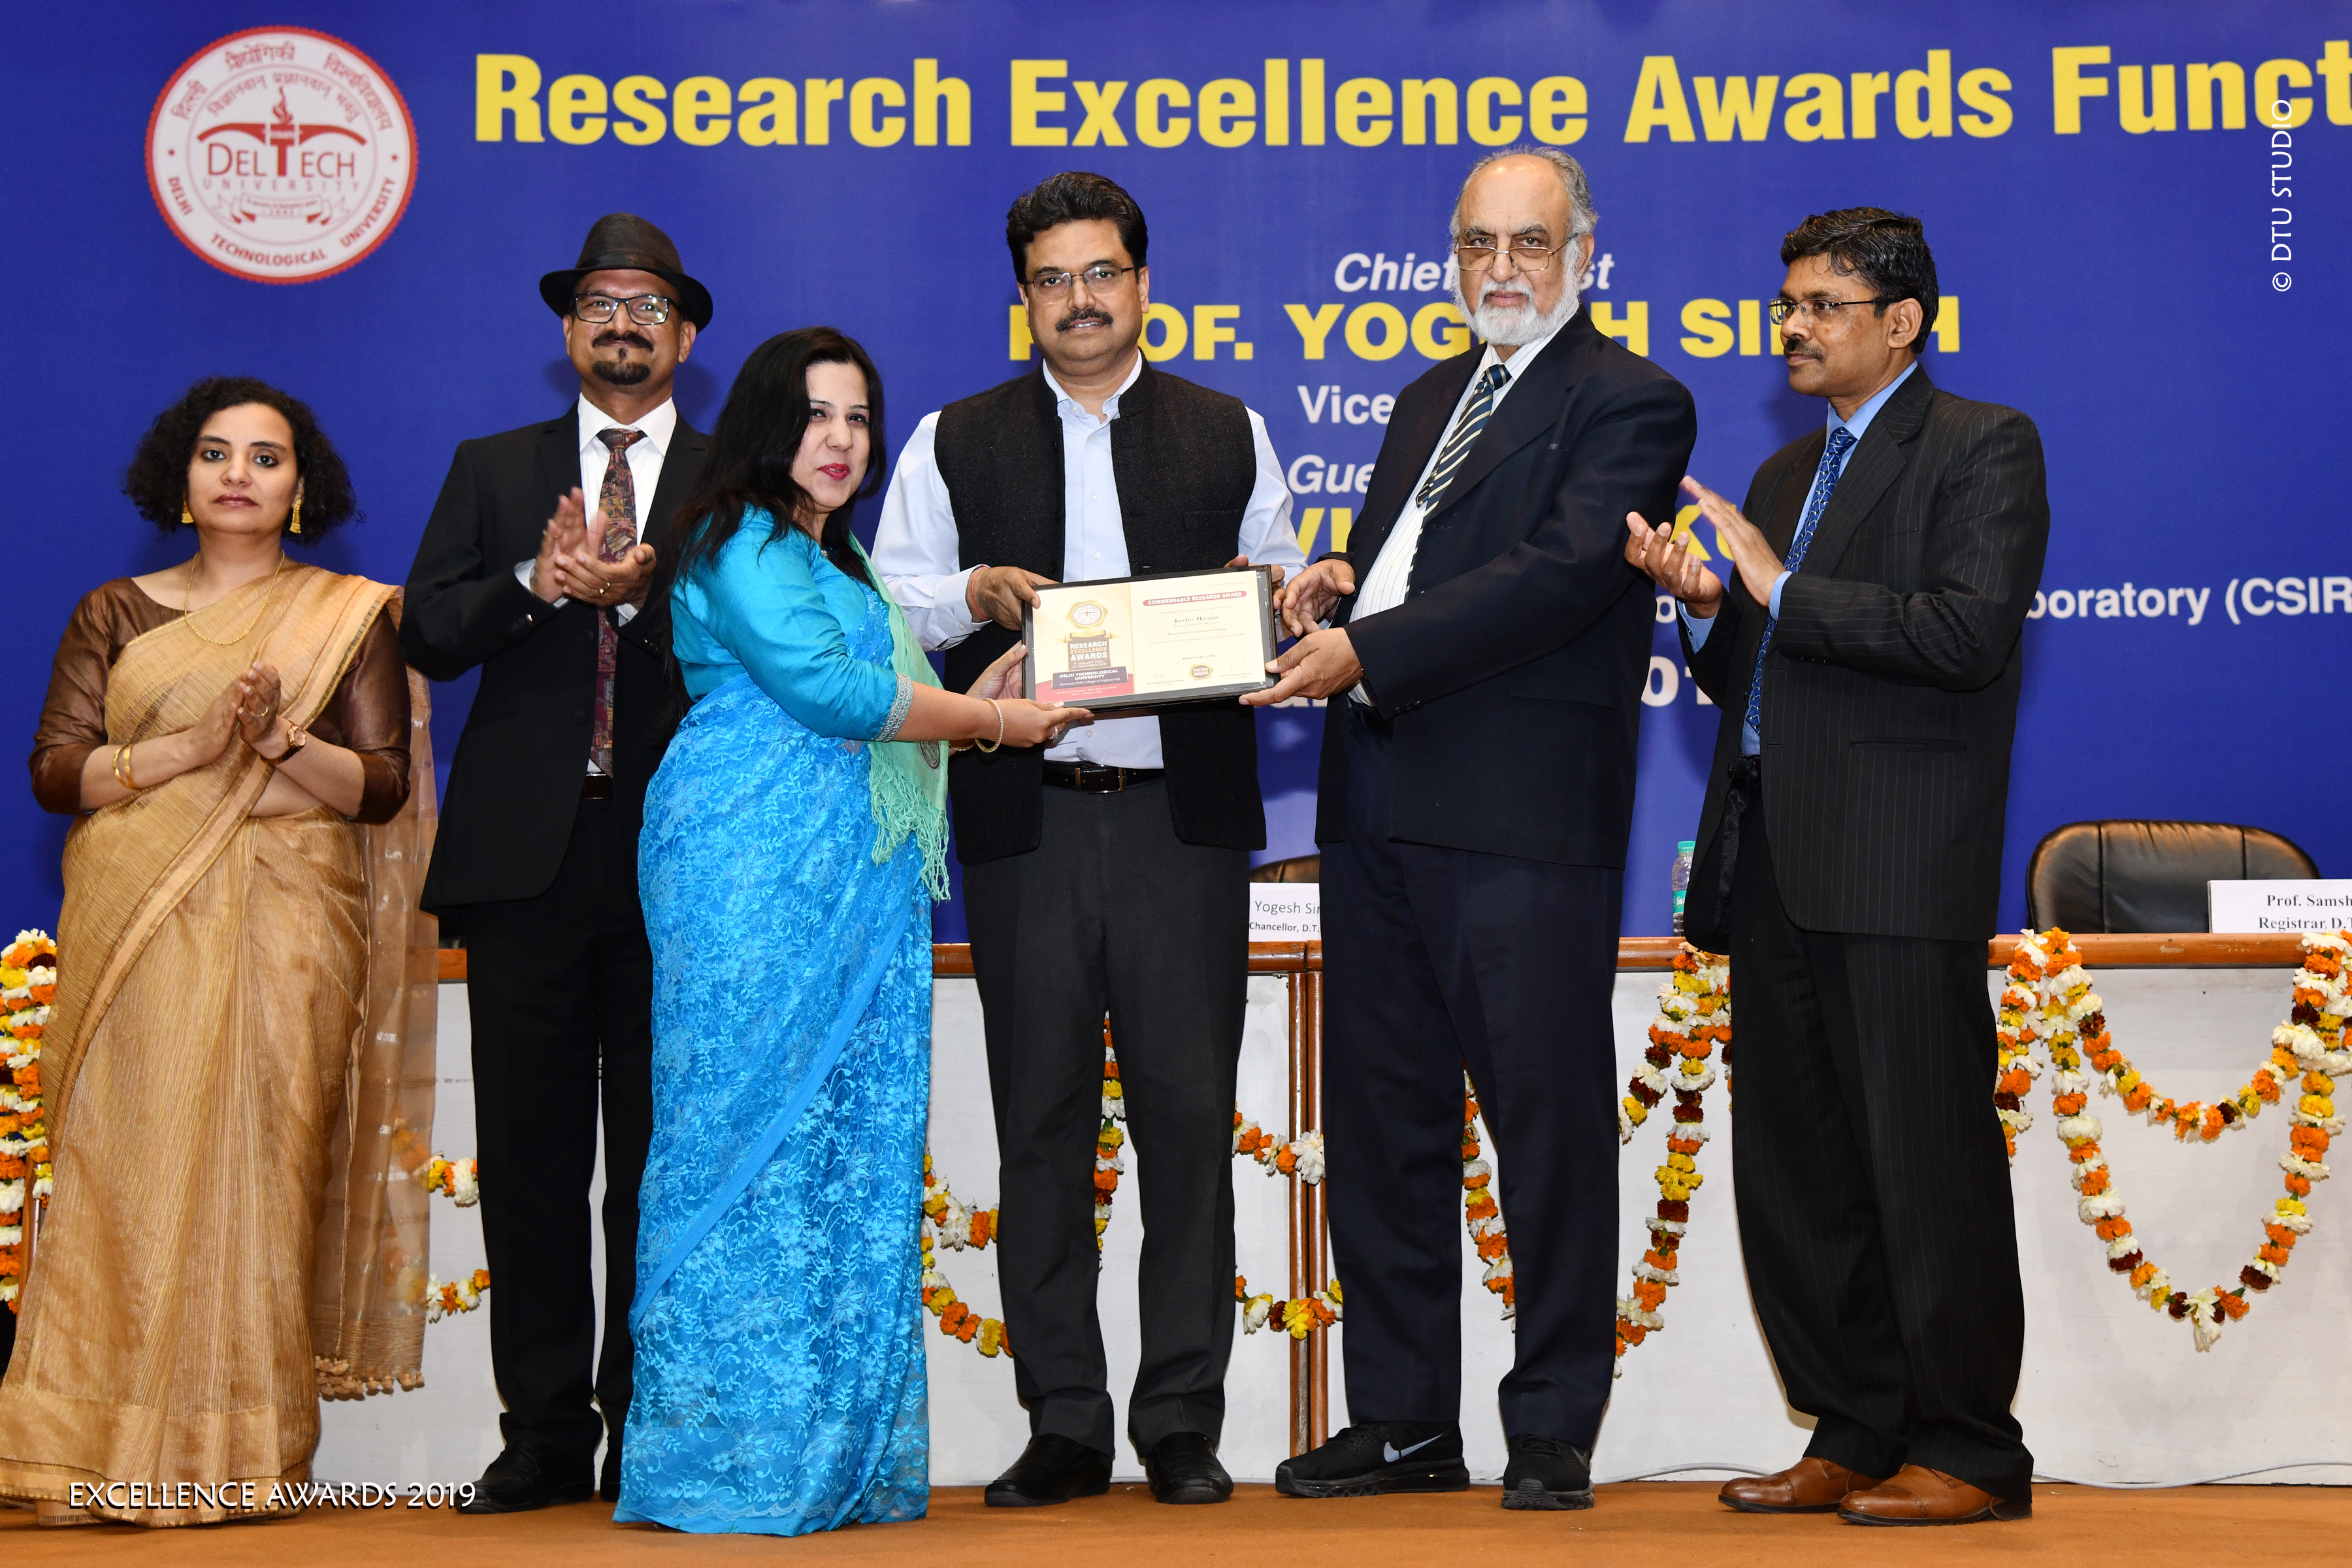 Research Excellence Awards